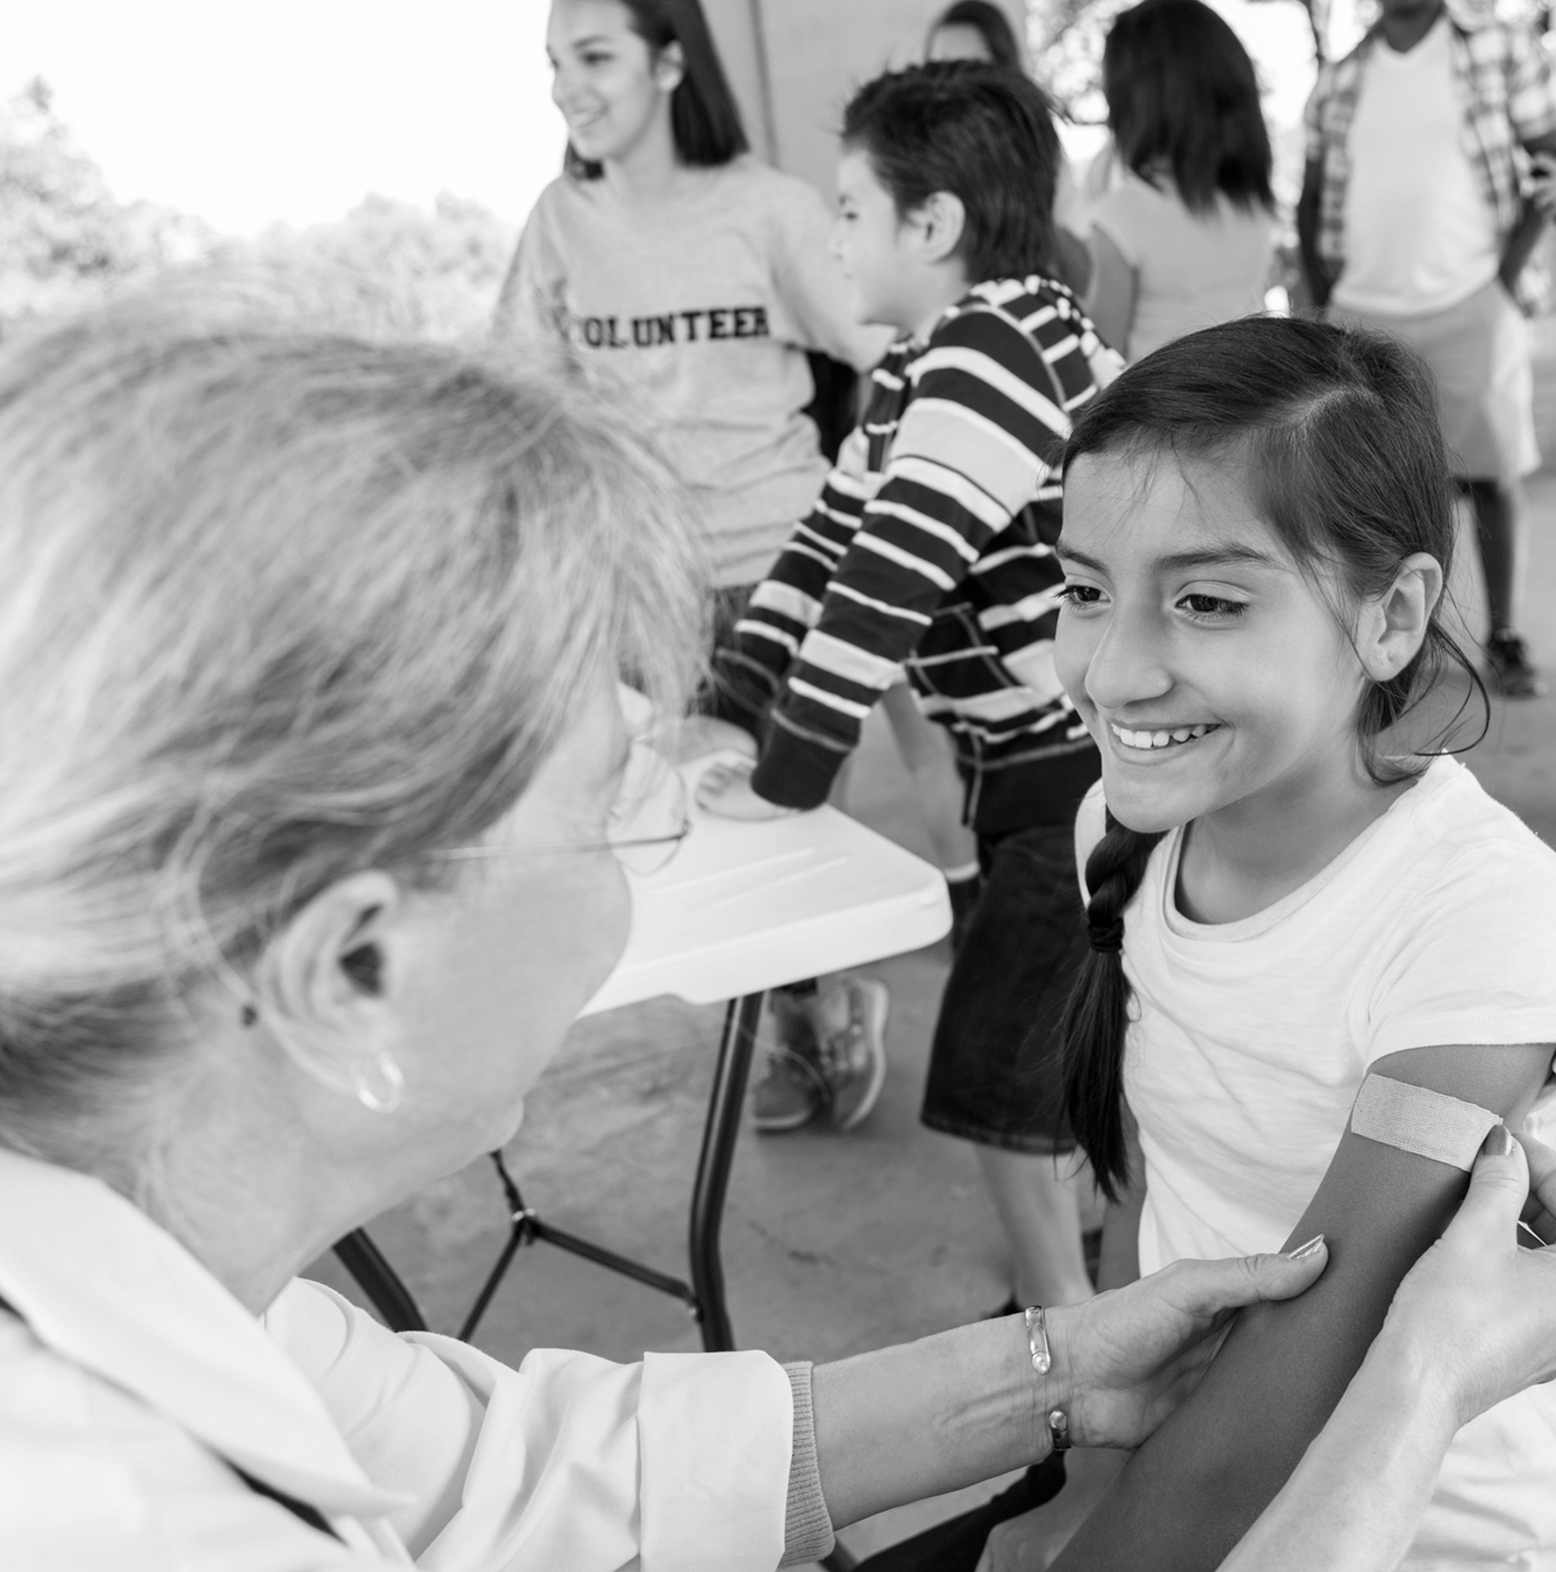 A nurse bandages a young girl's arm